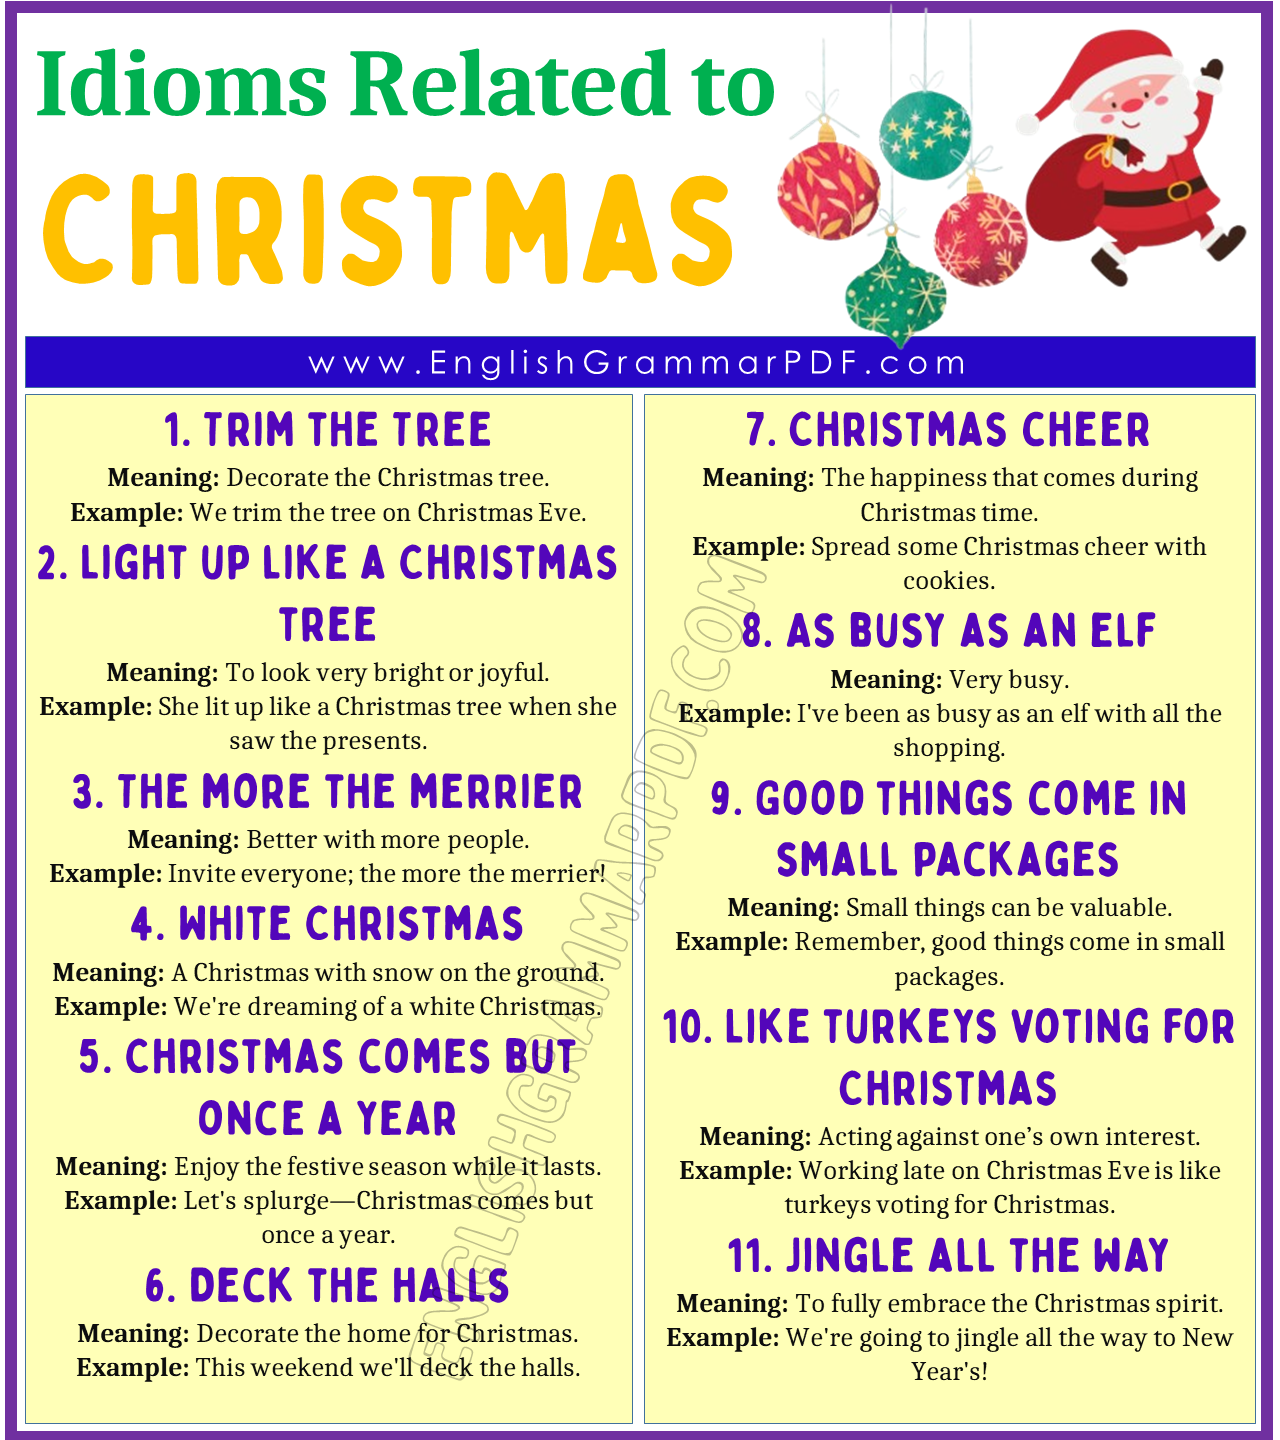 Idioms Related to Christmas